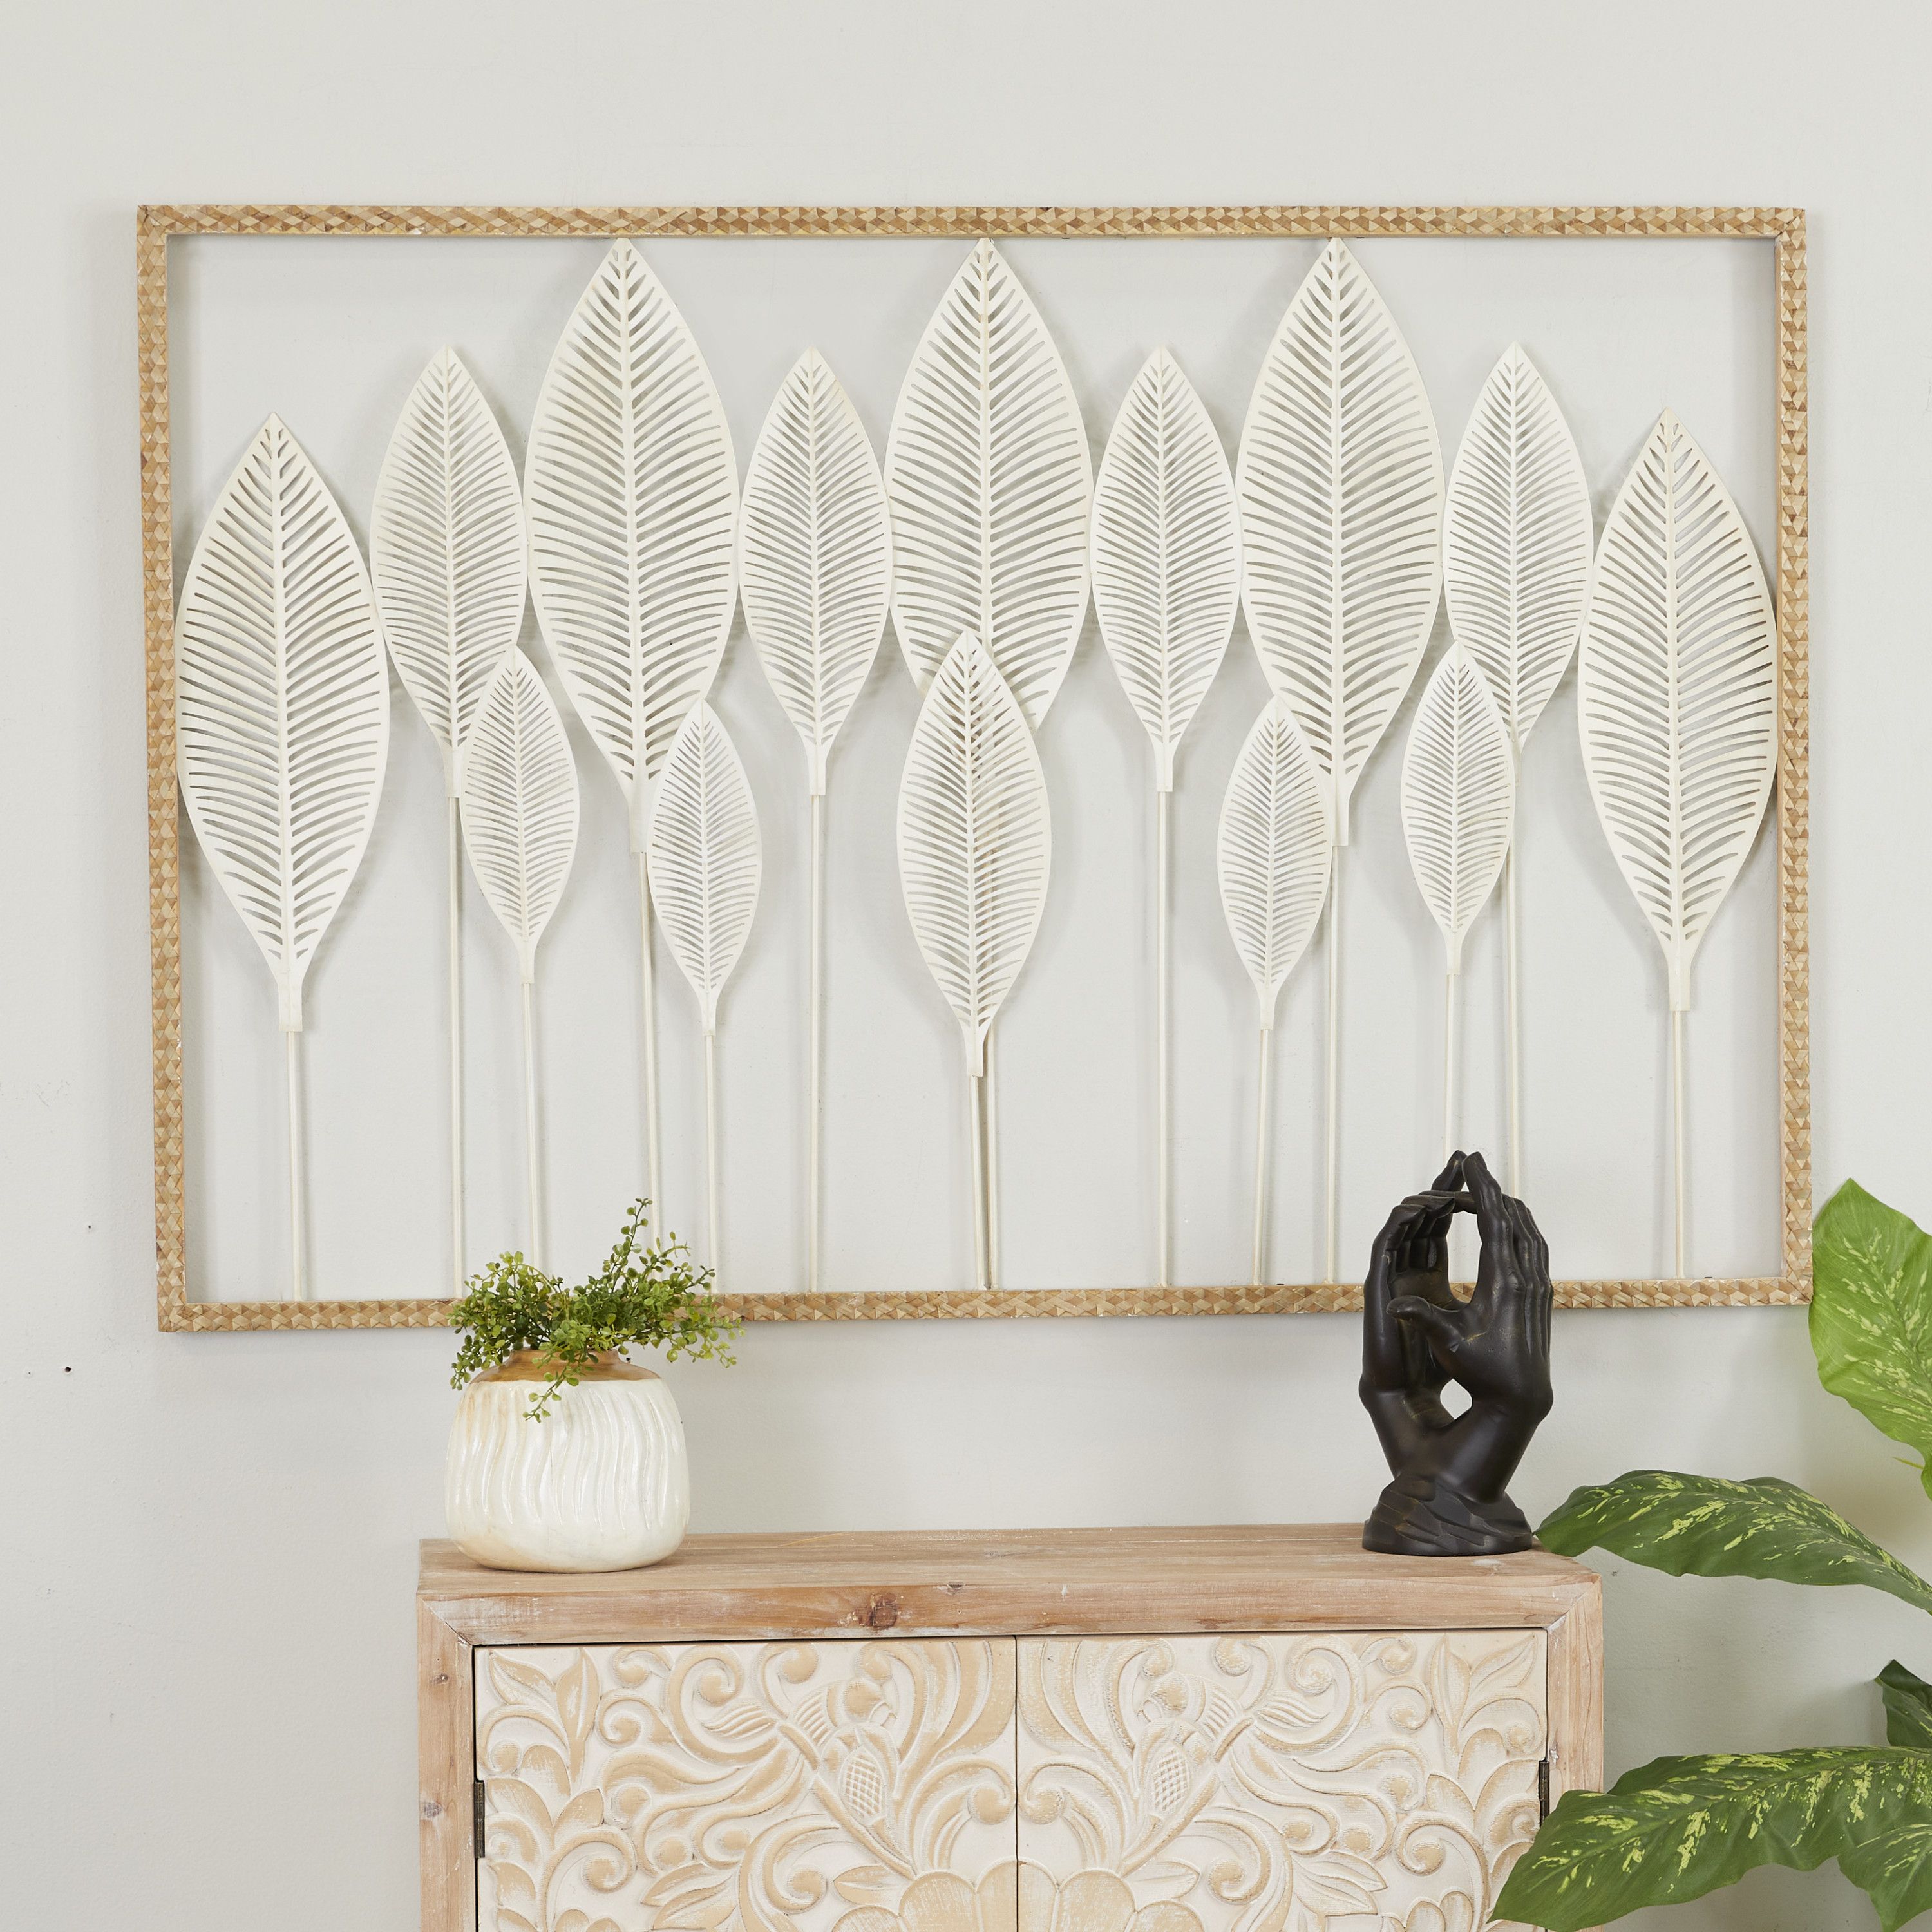 Decmode White Metal Tall Cut Out Leaf Wall Decor With Intricate Laser Cut  Designs – Walmart Intended For Tall Cut Out Leaf Wall Art (View 14 of 15)